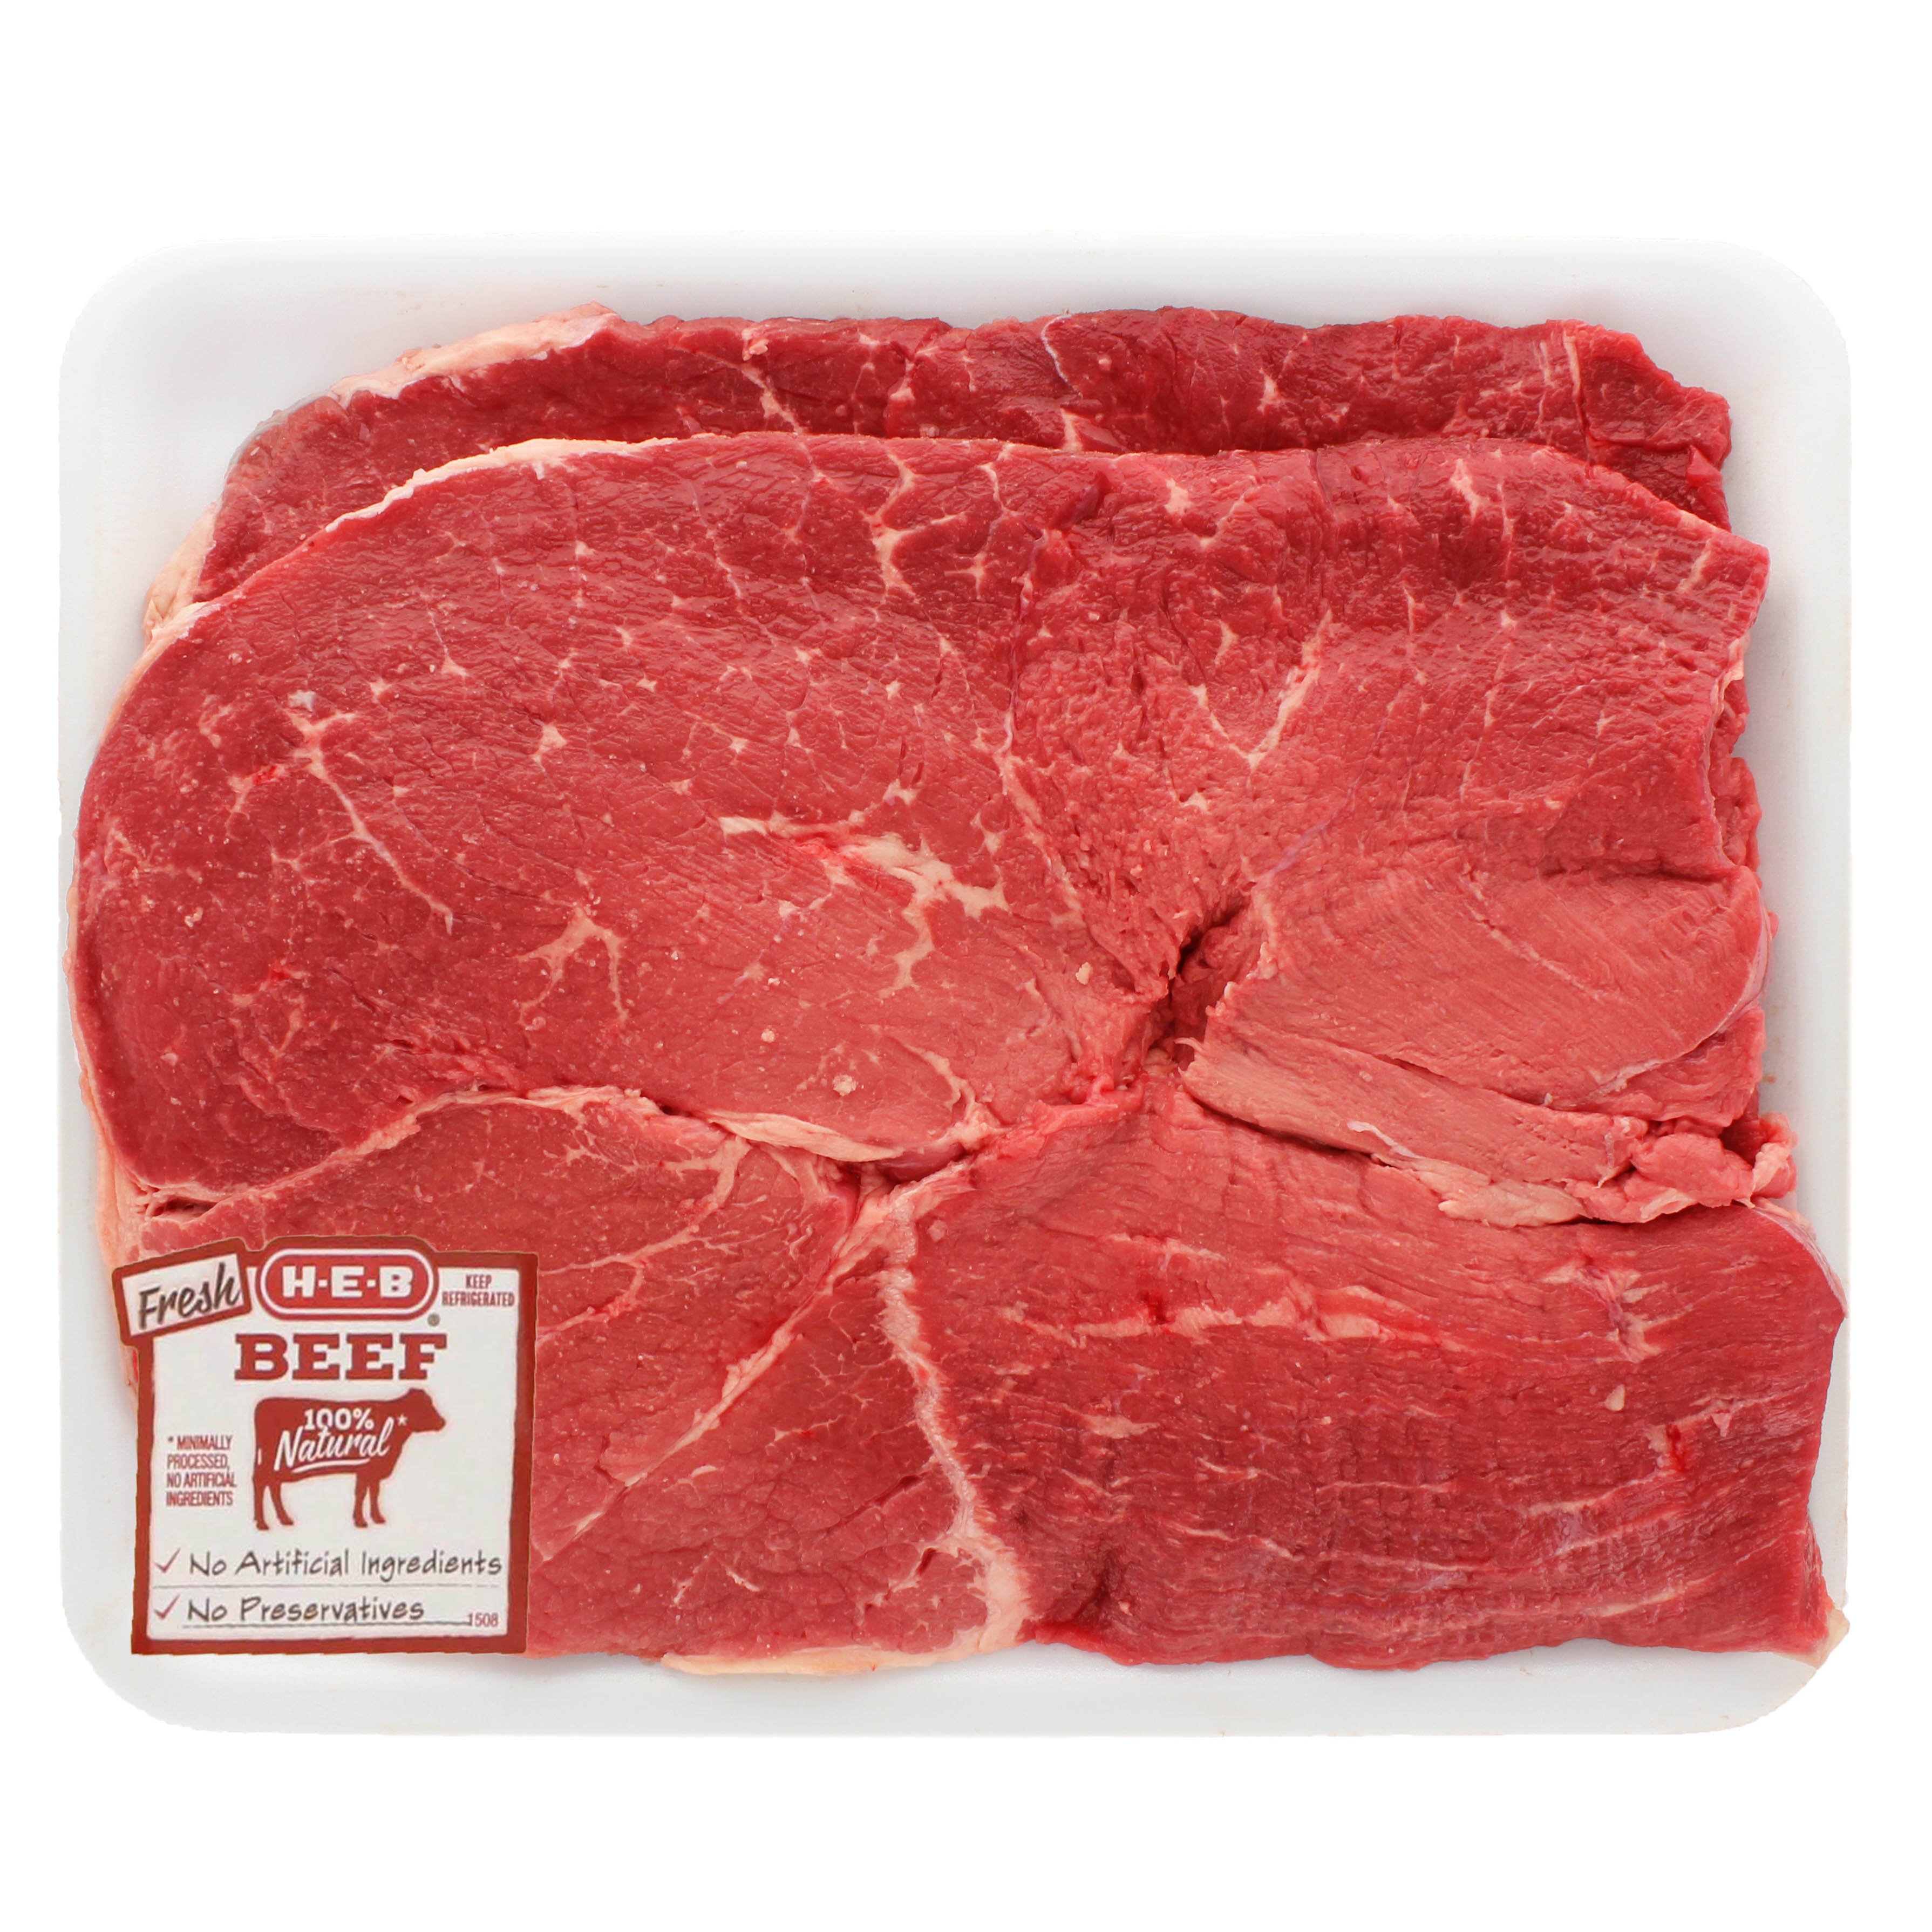 H E B Beef Round Steak Value Pack Usda Select Shop Beef At H E B 